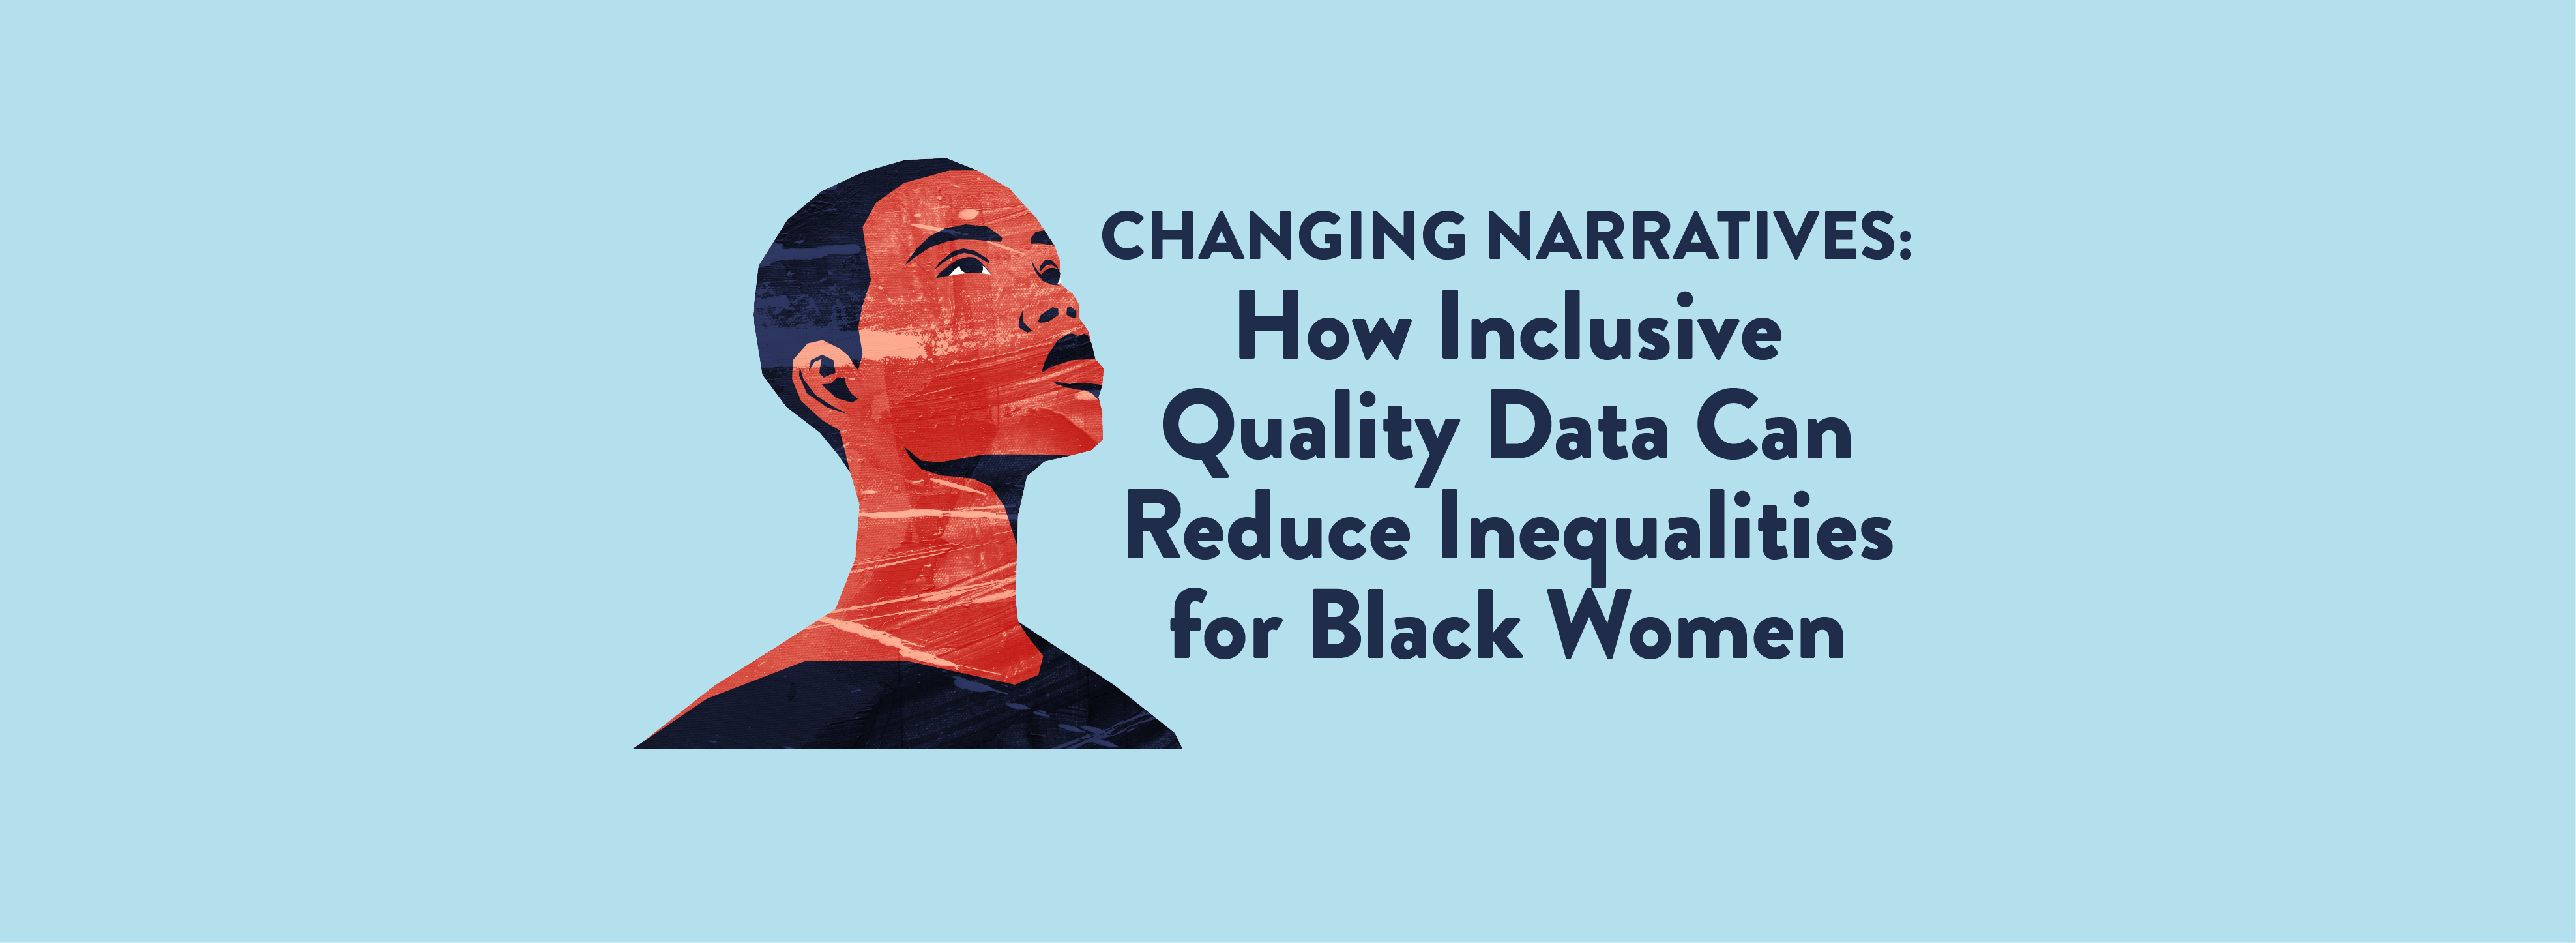 Changing Narratives: How Inclusive Quality Data Can Reduce Inequalities for Black Women  